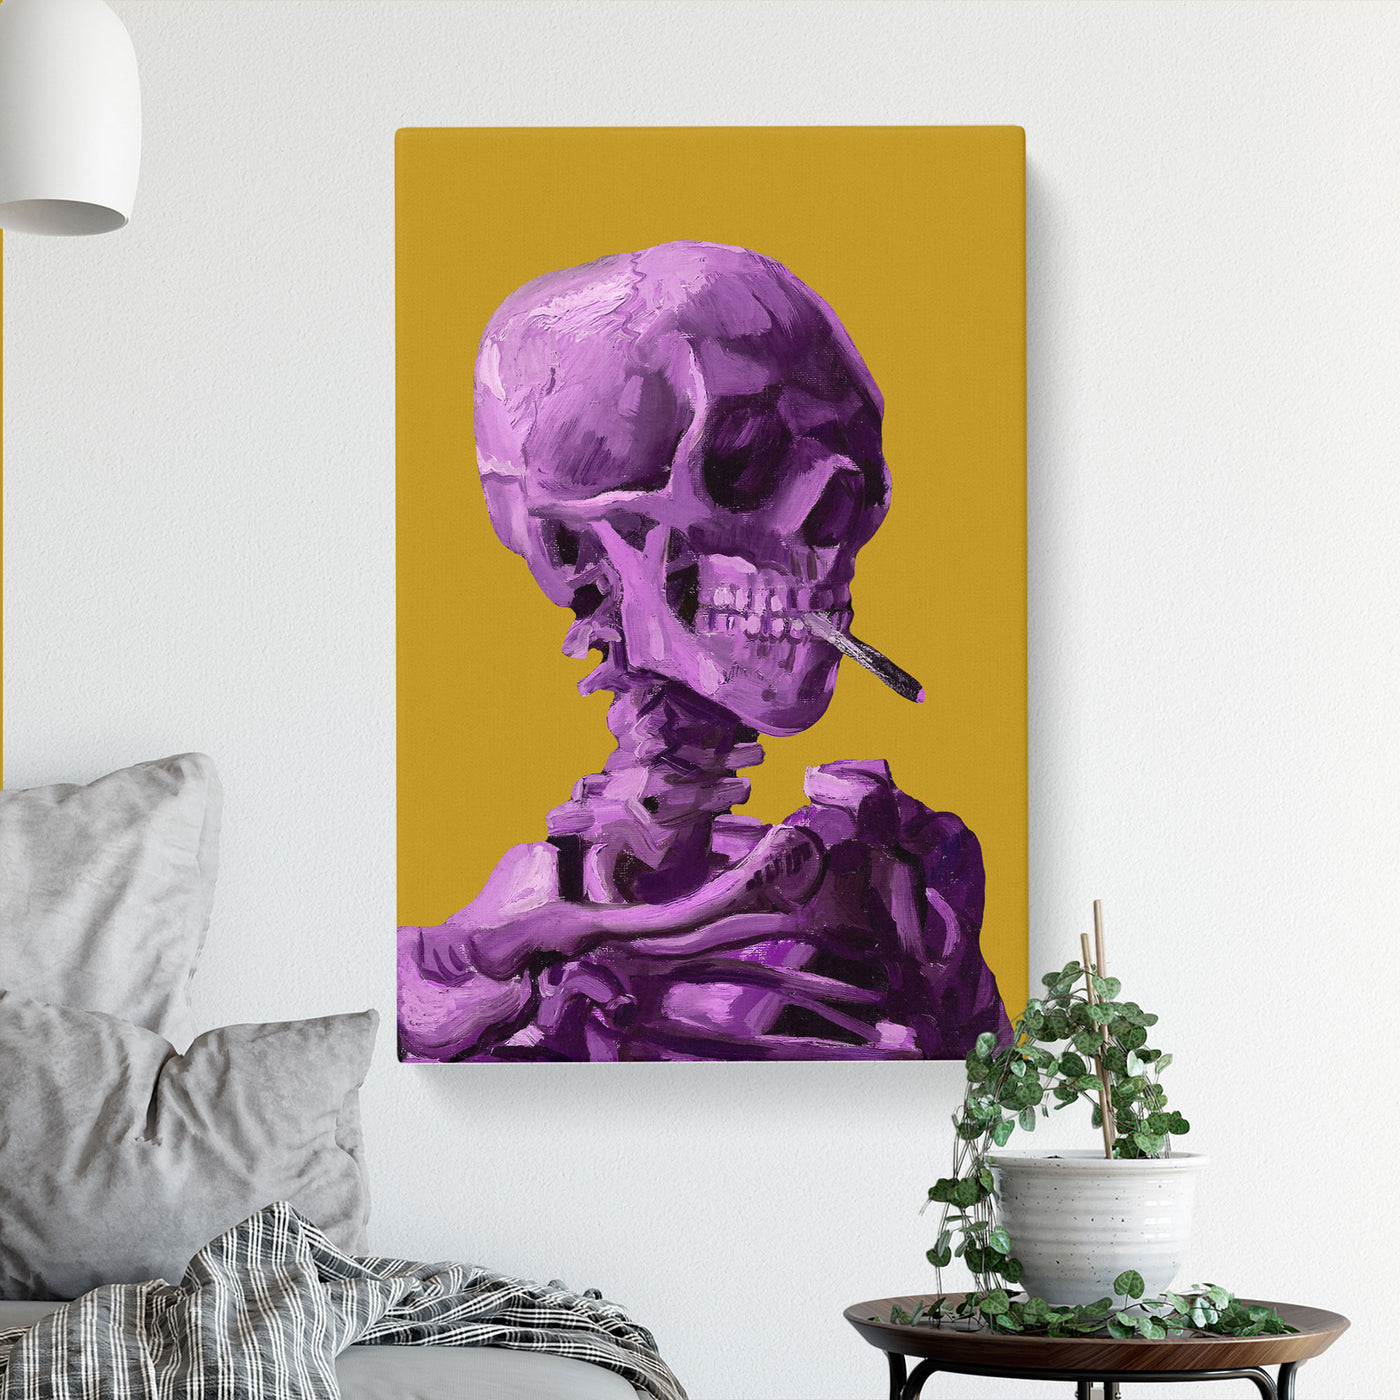 Purple Skull Of A Skeleton With Cigarette By Vincent Van Gogh